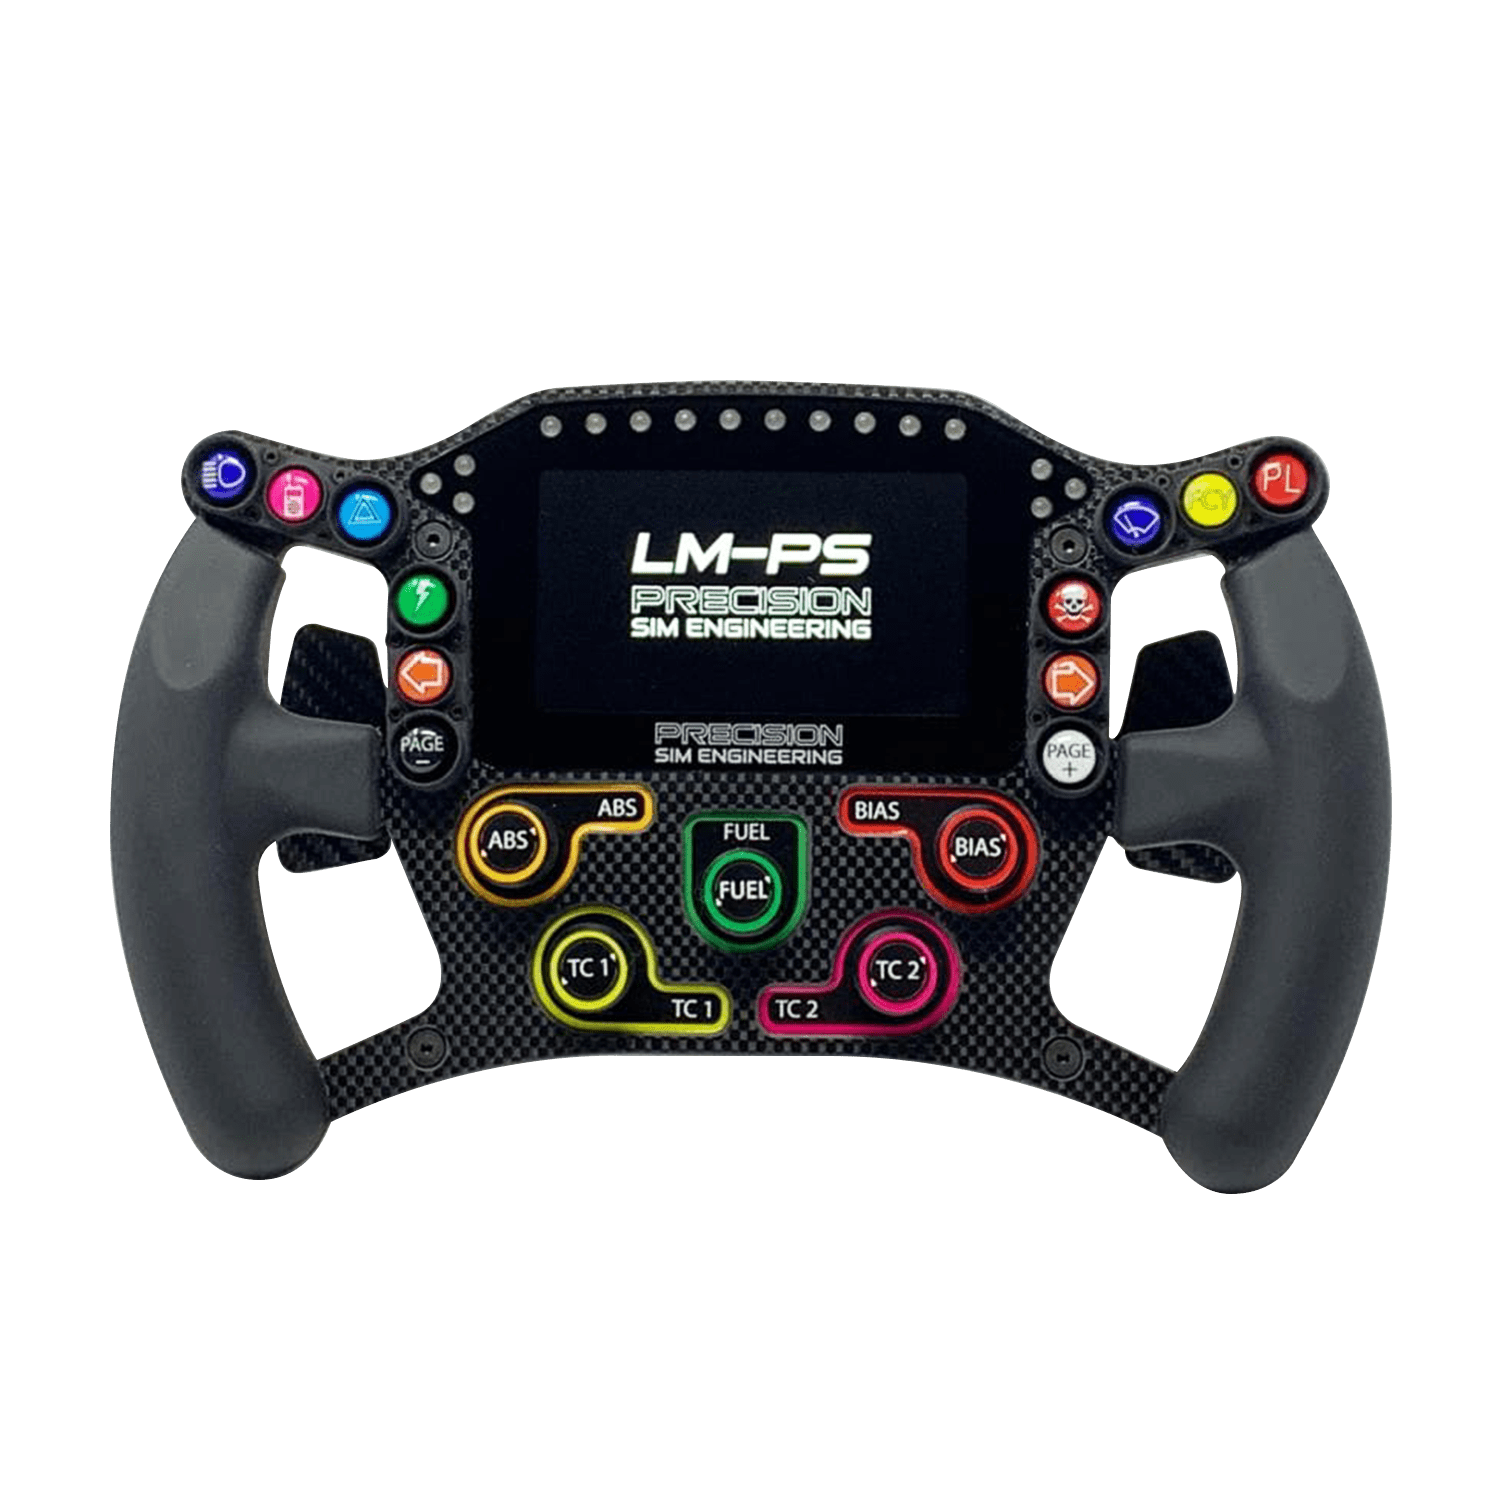  Playseat Formula Sim Racing Cockpit, High Performance Racing  Simulator Cockpit for all Steering Wheels, Pedals and all Consoles, For  Authentic F1 Racing on the Next Level, Fully Adjustable